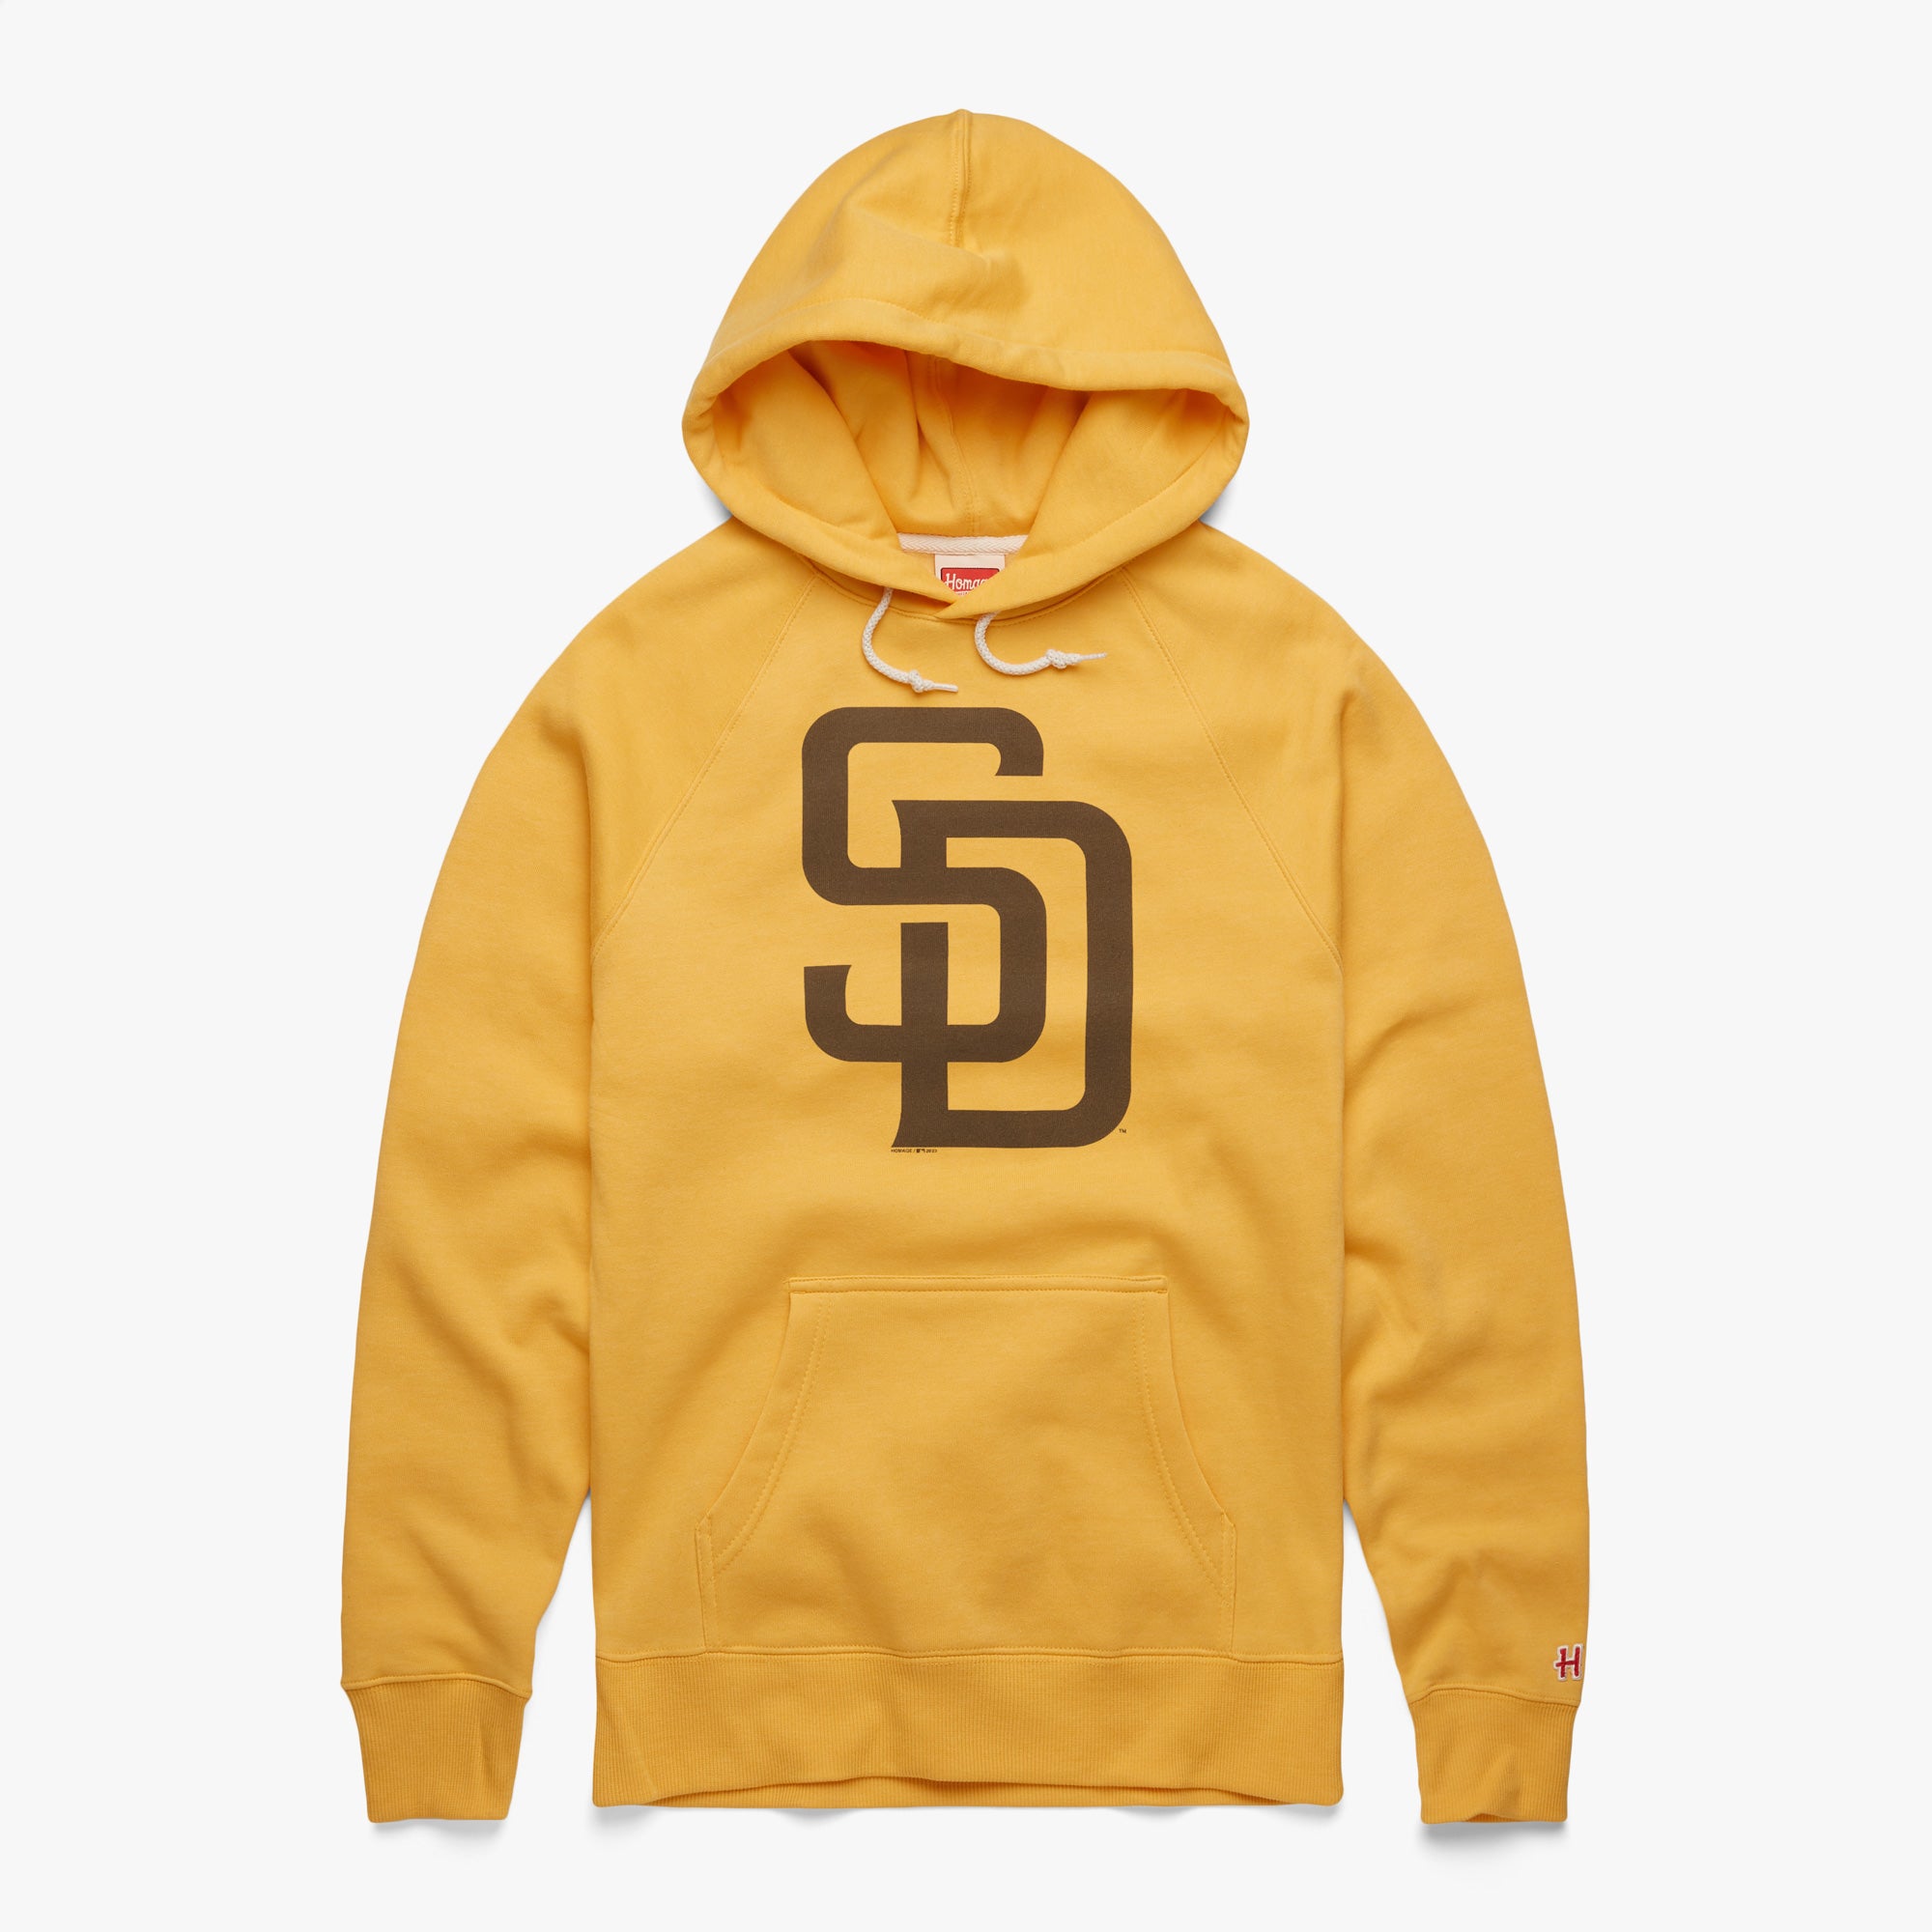 San Diego Padres '20 Hoodie from Homage. | Gold | Vintage Apparel from Homage.